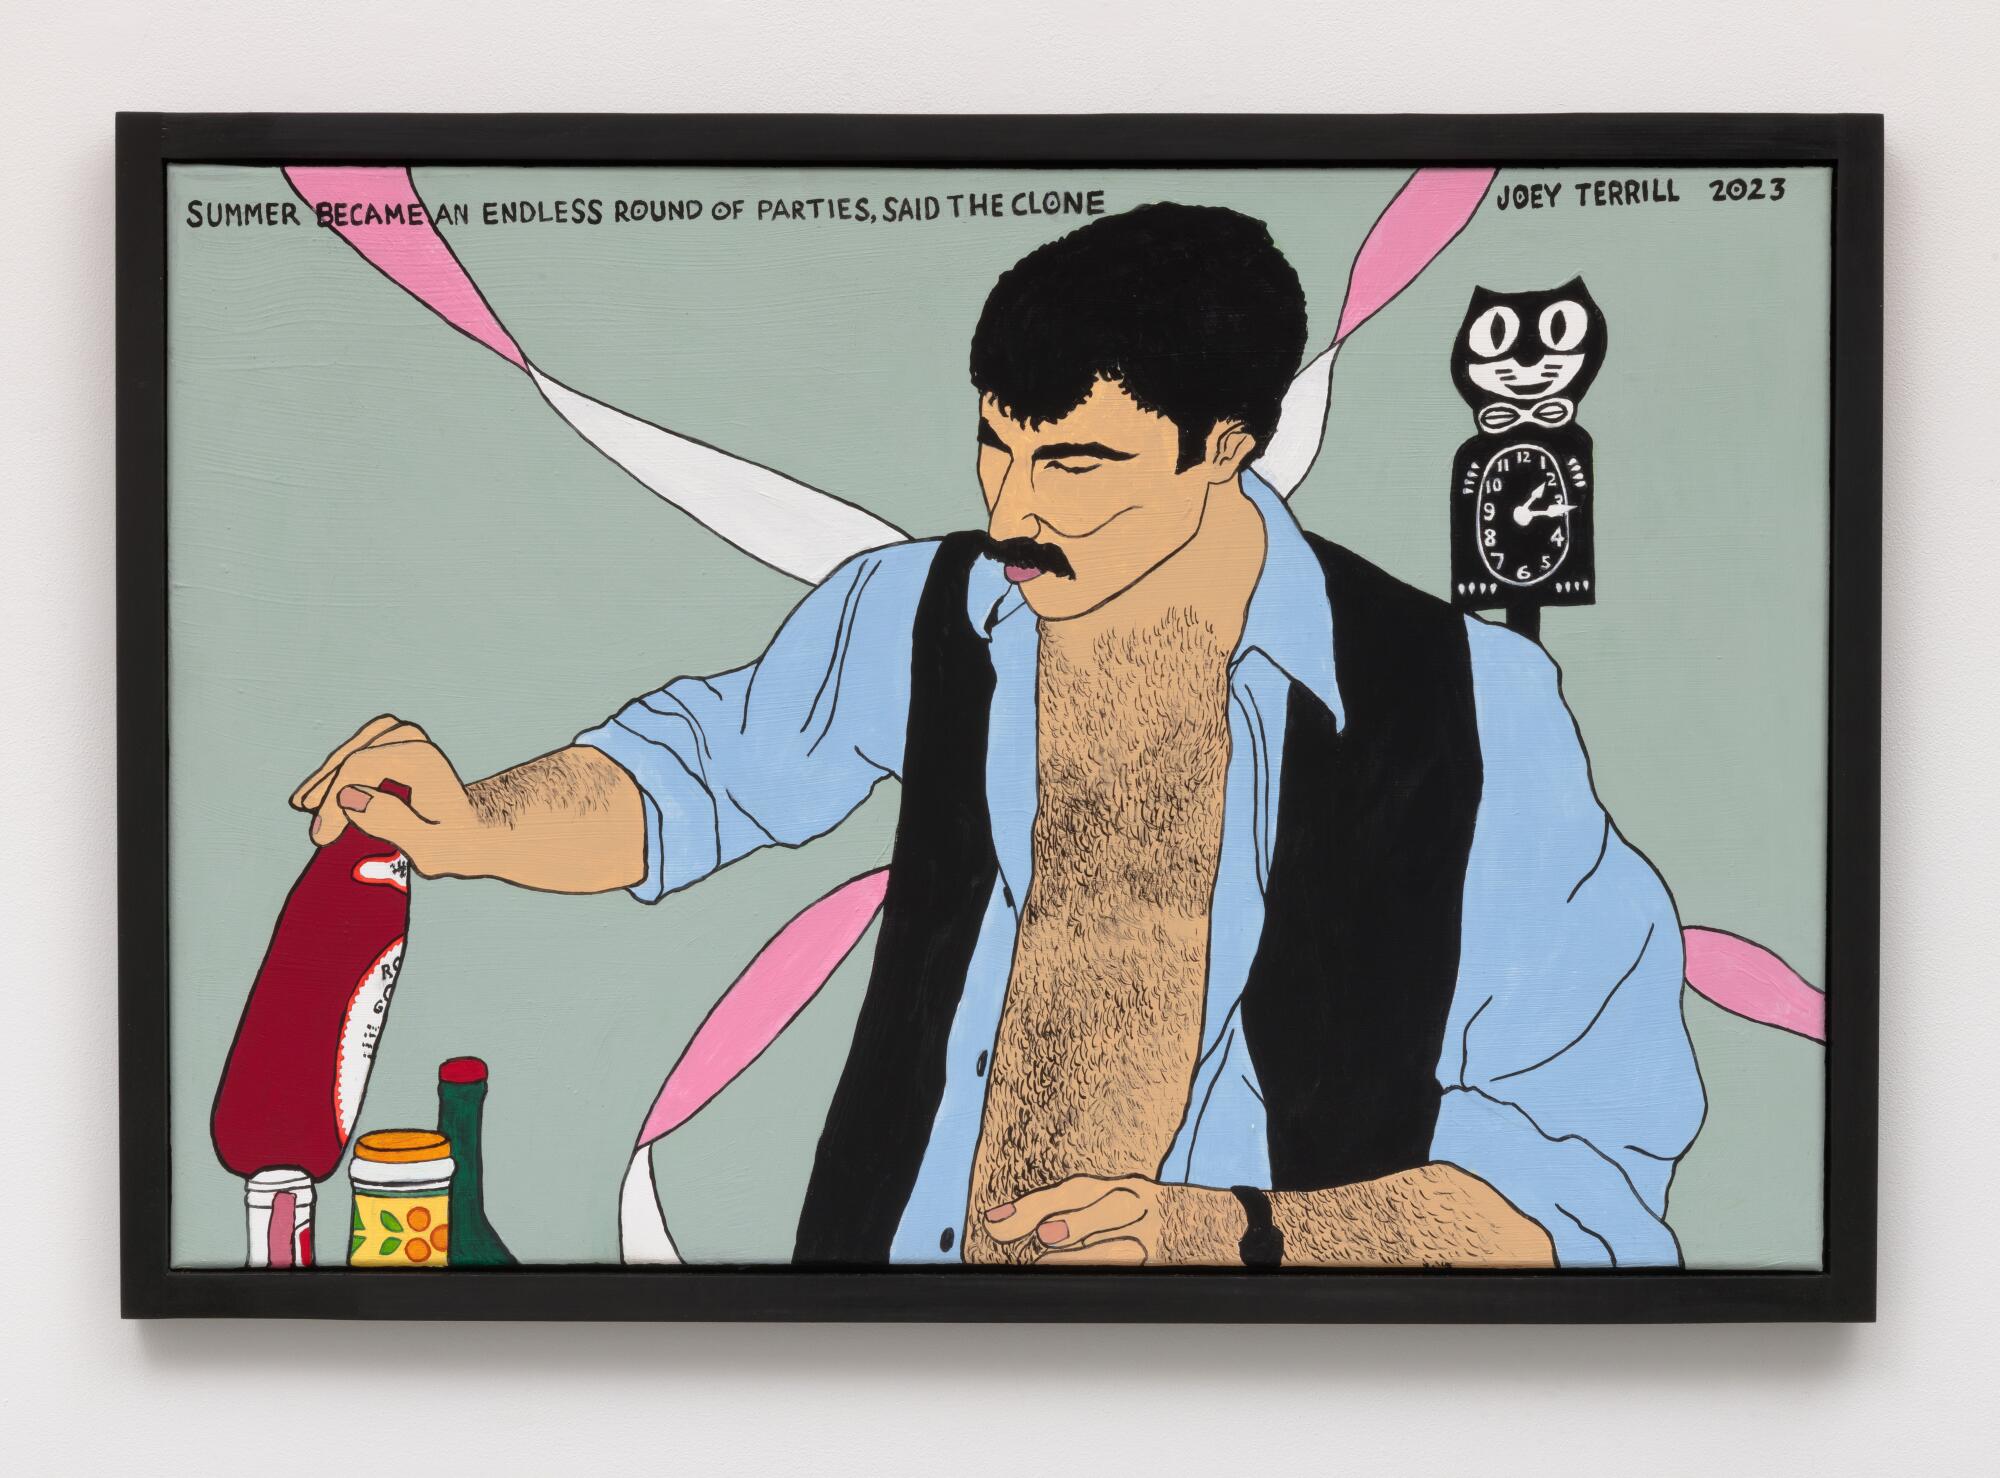 A horizontal painting shows a man with a mustache, his shirt unbuttoned over a hairy chest, fixing a drink.